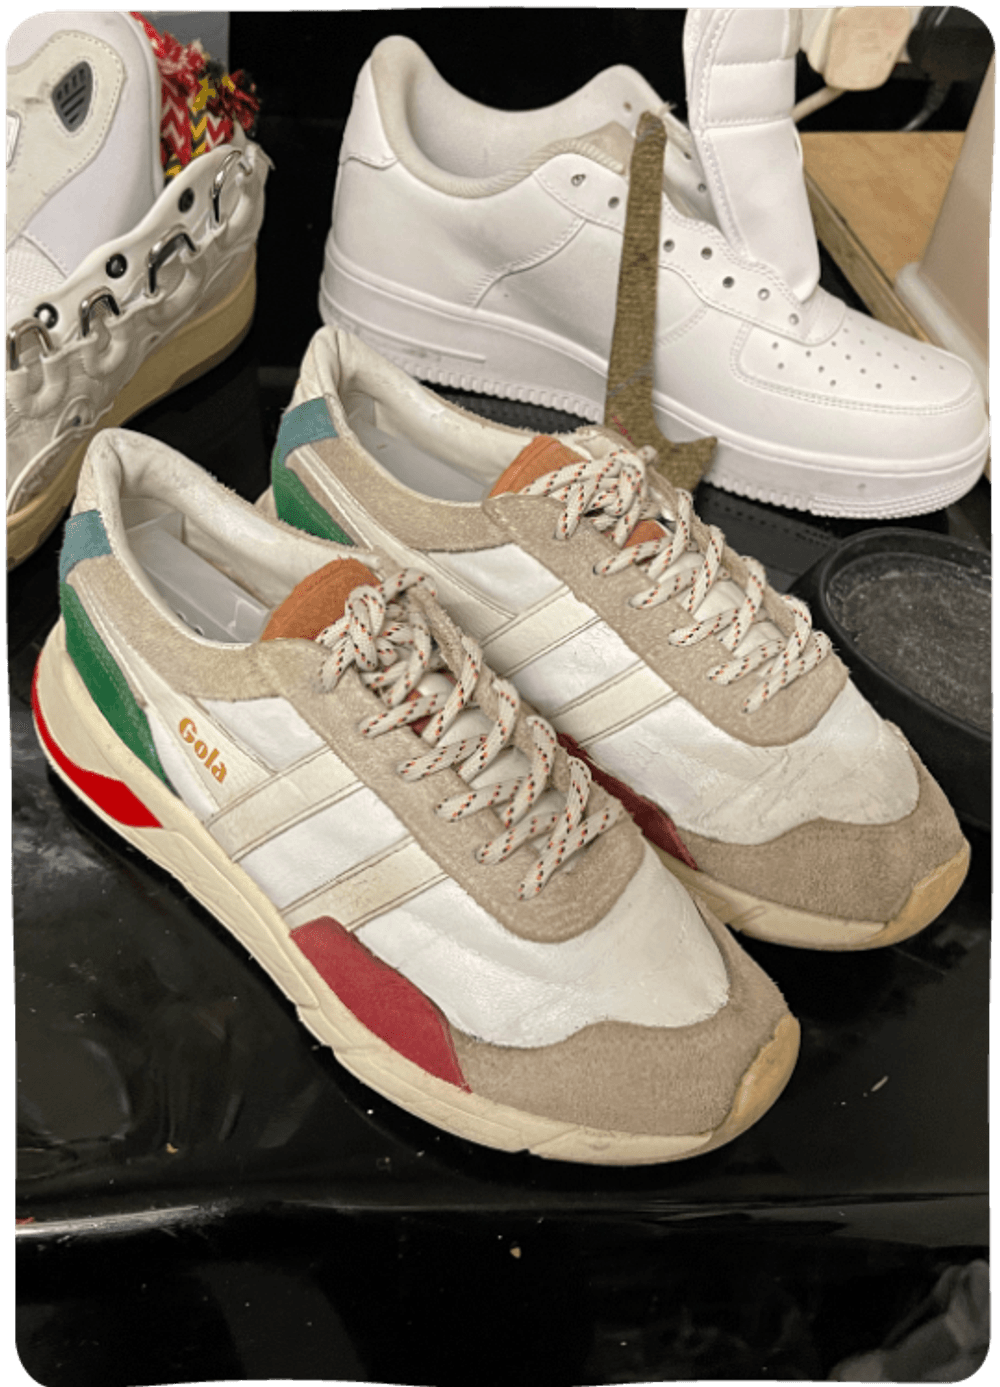 A pair of Gola trainers (white with bright colourful accents) on a workbench. The trainers are visibly not new, but look fresh and well looked after.